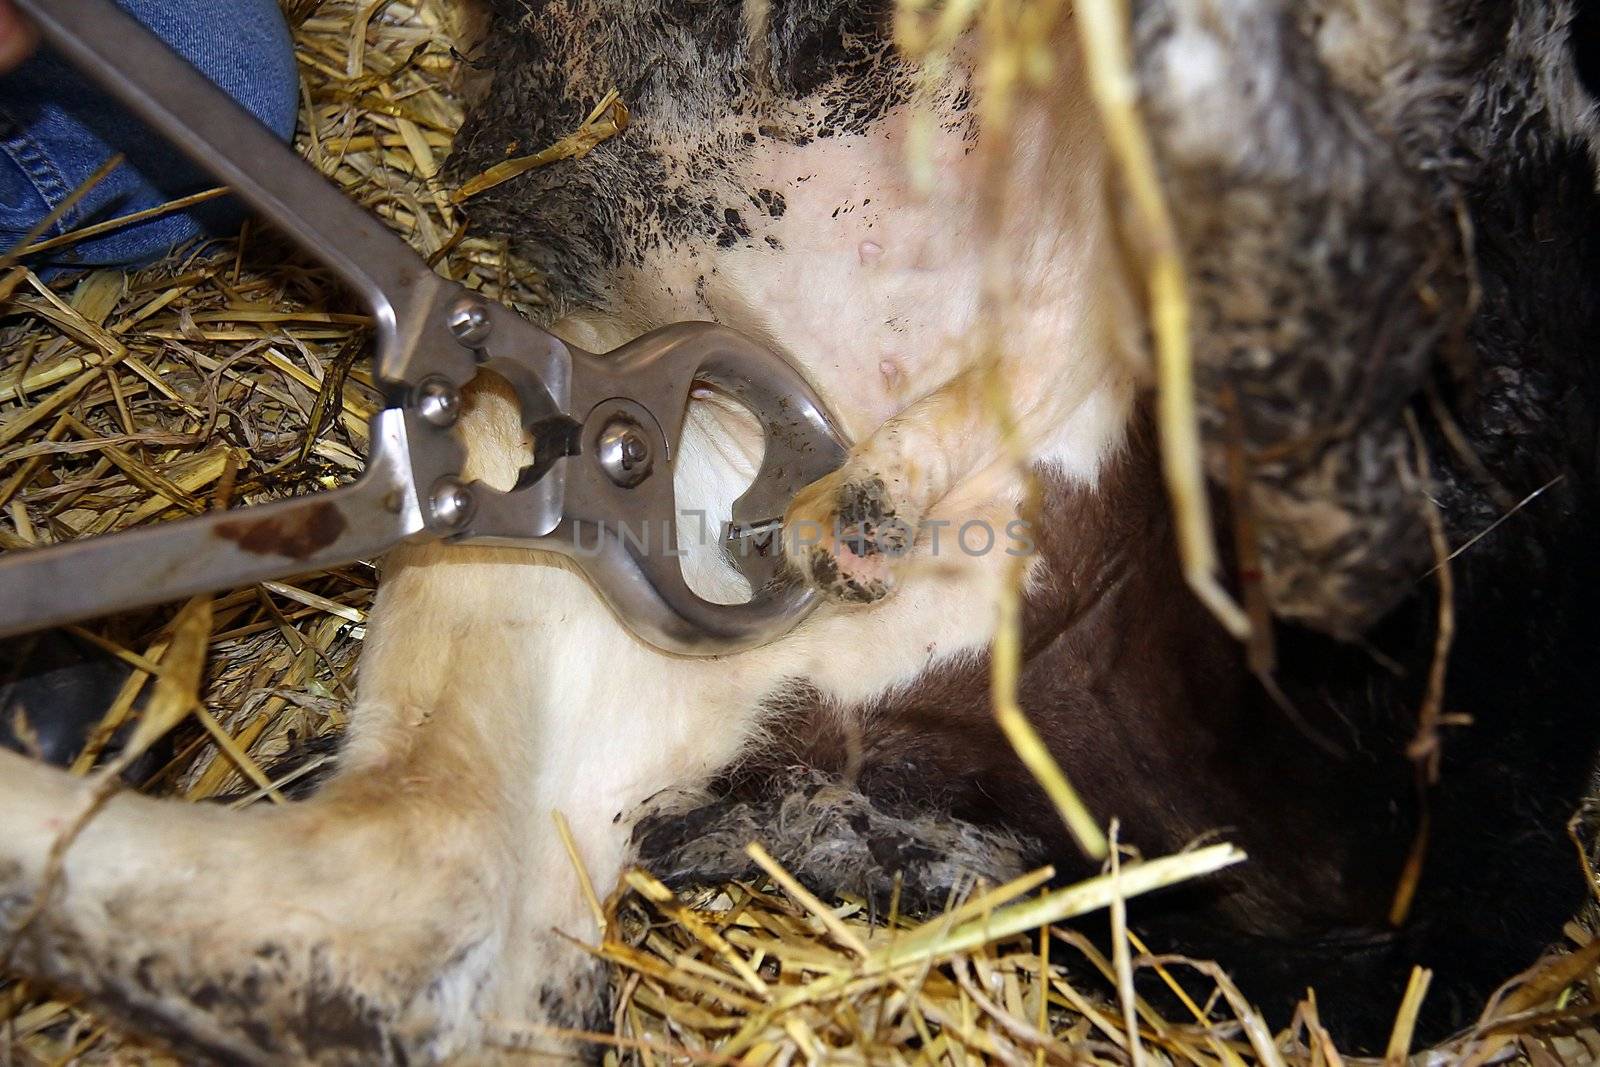 Castration of a bull calf by means of Burdizzo pliers